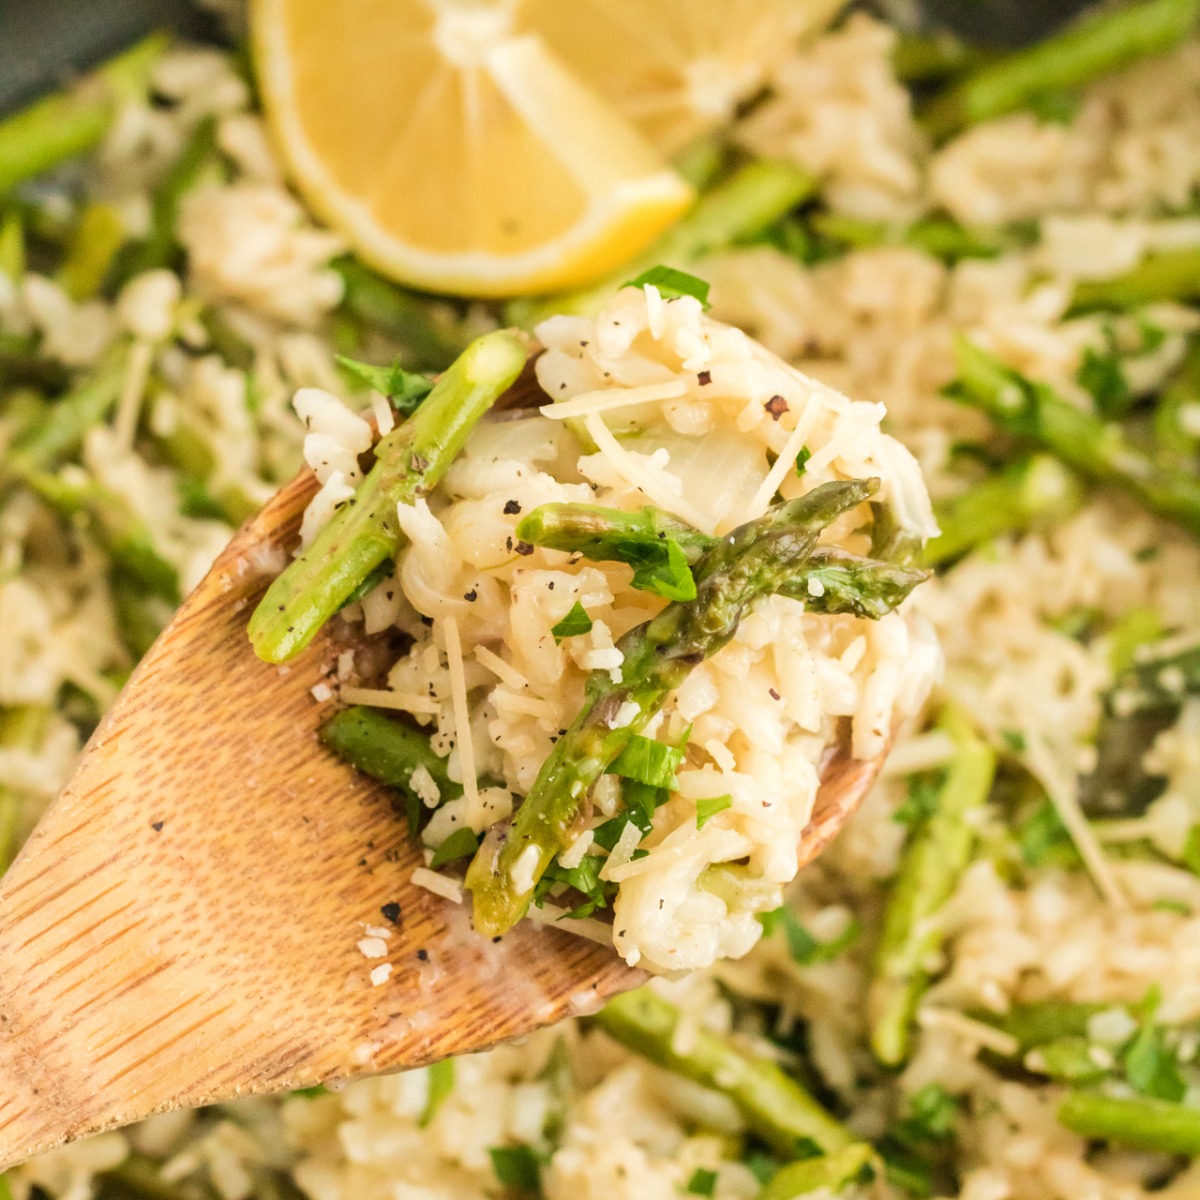 Wooden spoon of risotto and asparagus with lemon ready to plate.